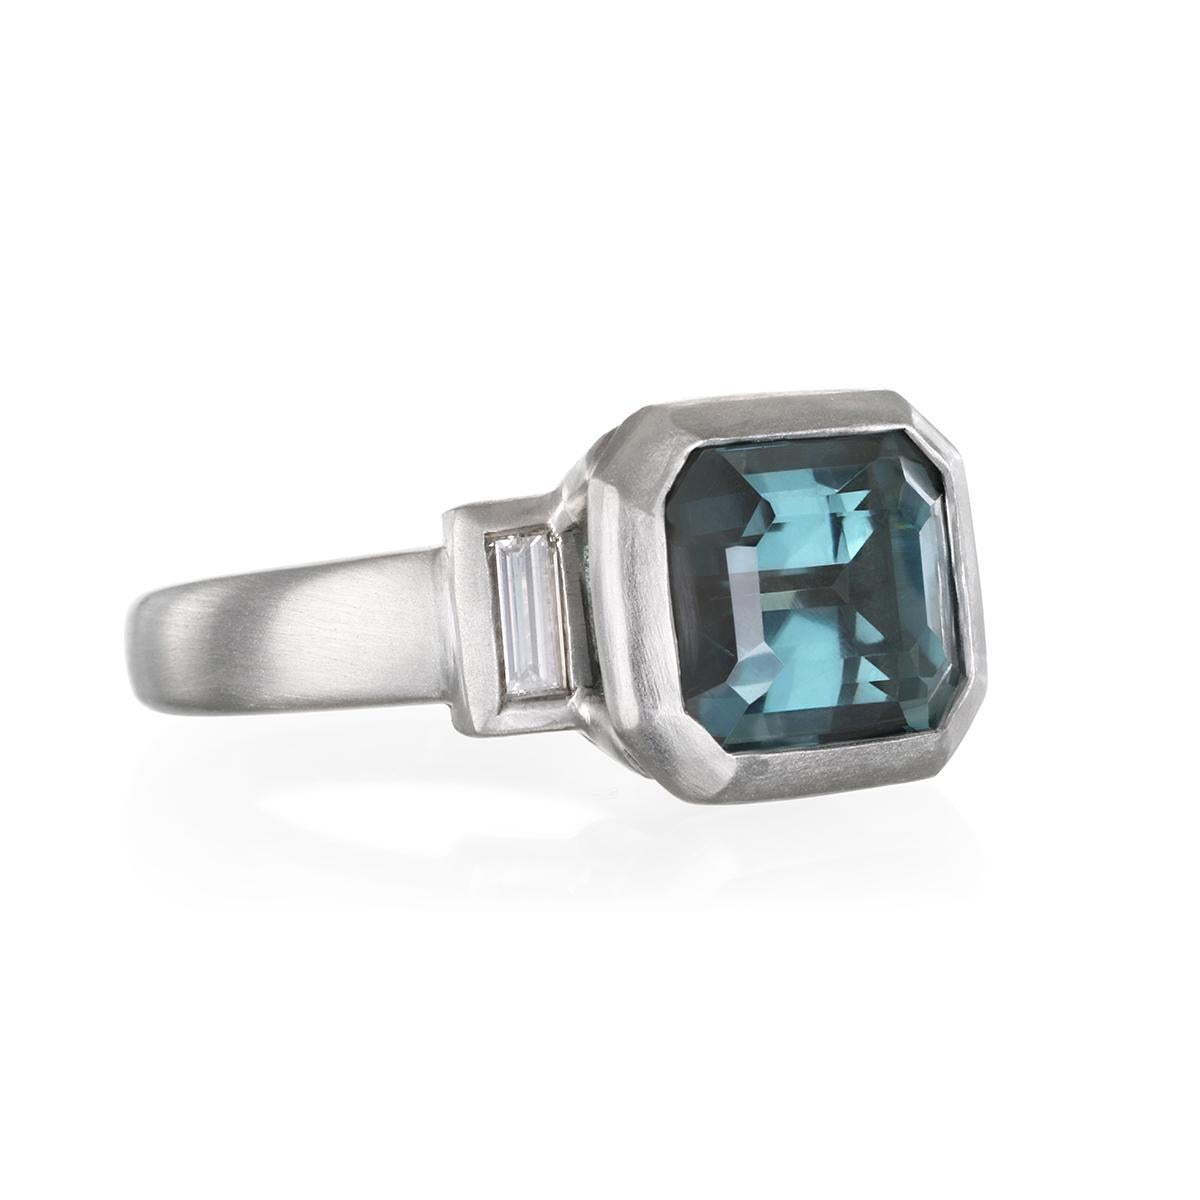 A rich shade of blue-green, this emerald-cut Tourmaline is flanked by two diamond baguettes. Powerful, sleek in a robust matte-finished platinum setting.  A stunning, one-of-a-kind statement piece.

Blue Green Tourmaline: 6.20 Carats
Diamonds: .37